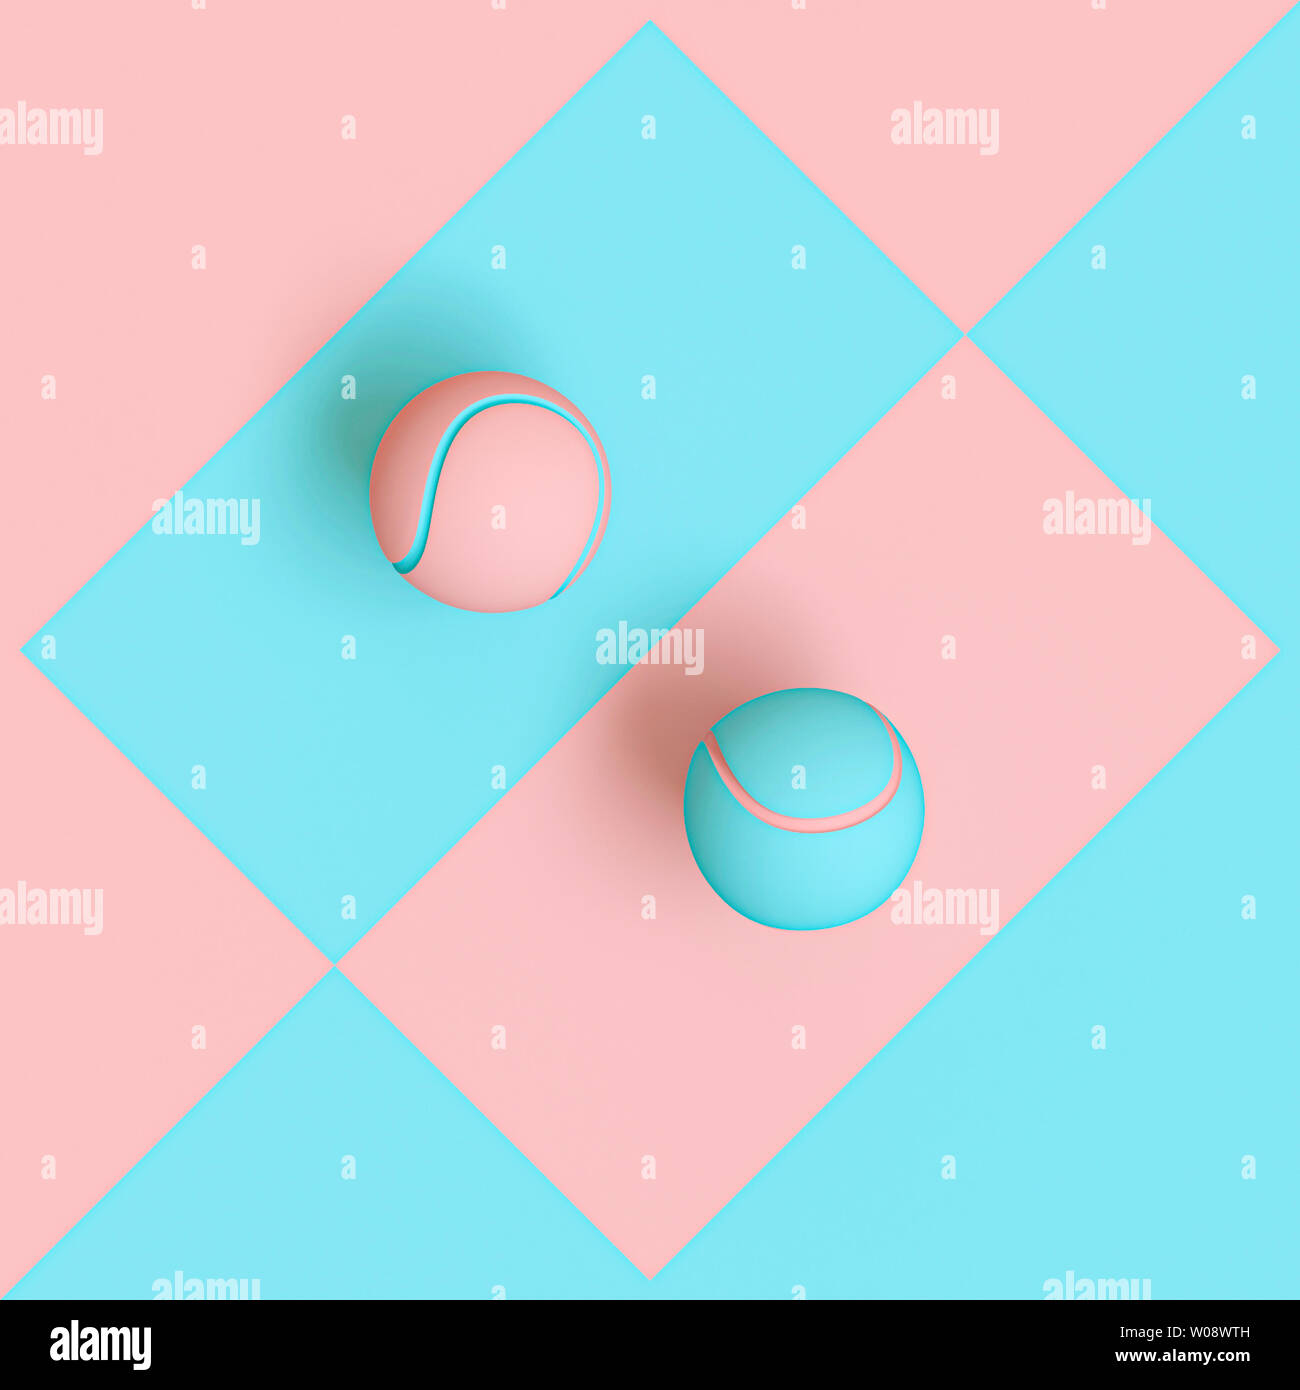 blue and pink tennis balls on a two-tone geometric background, flat lay style, 3d rendering. Concept of difference between sexes and uniqueness. Stock Photo